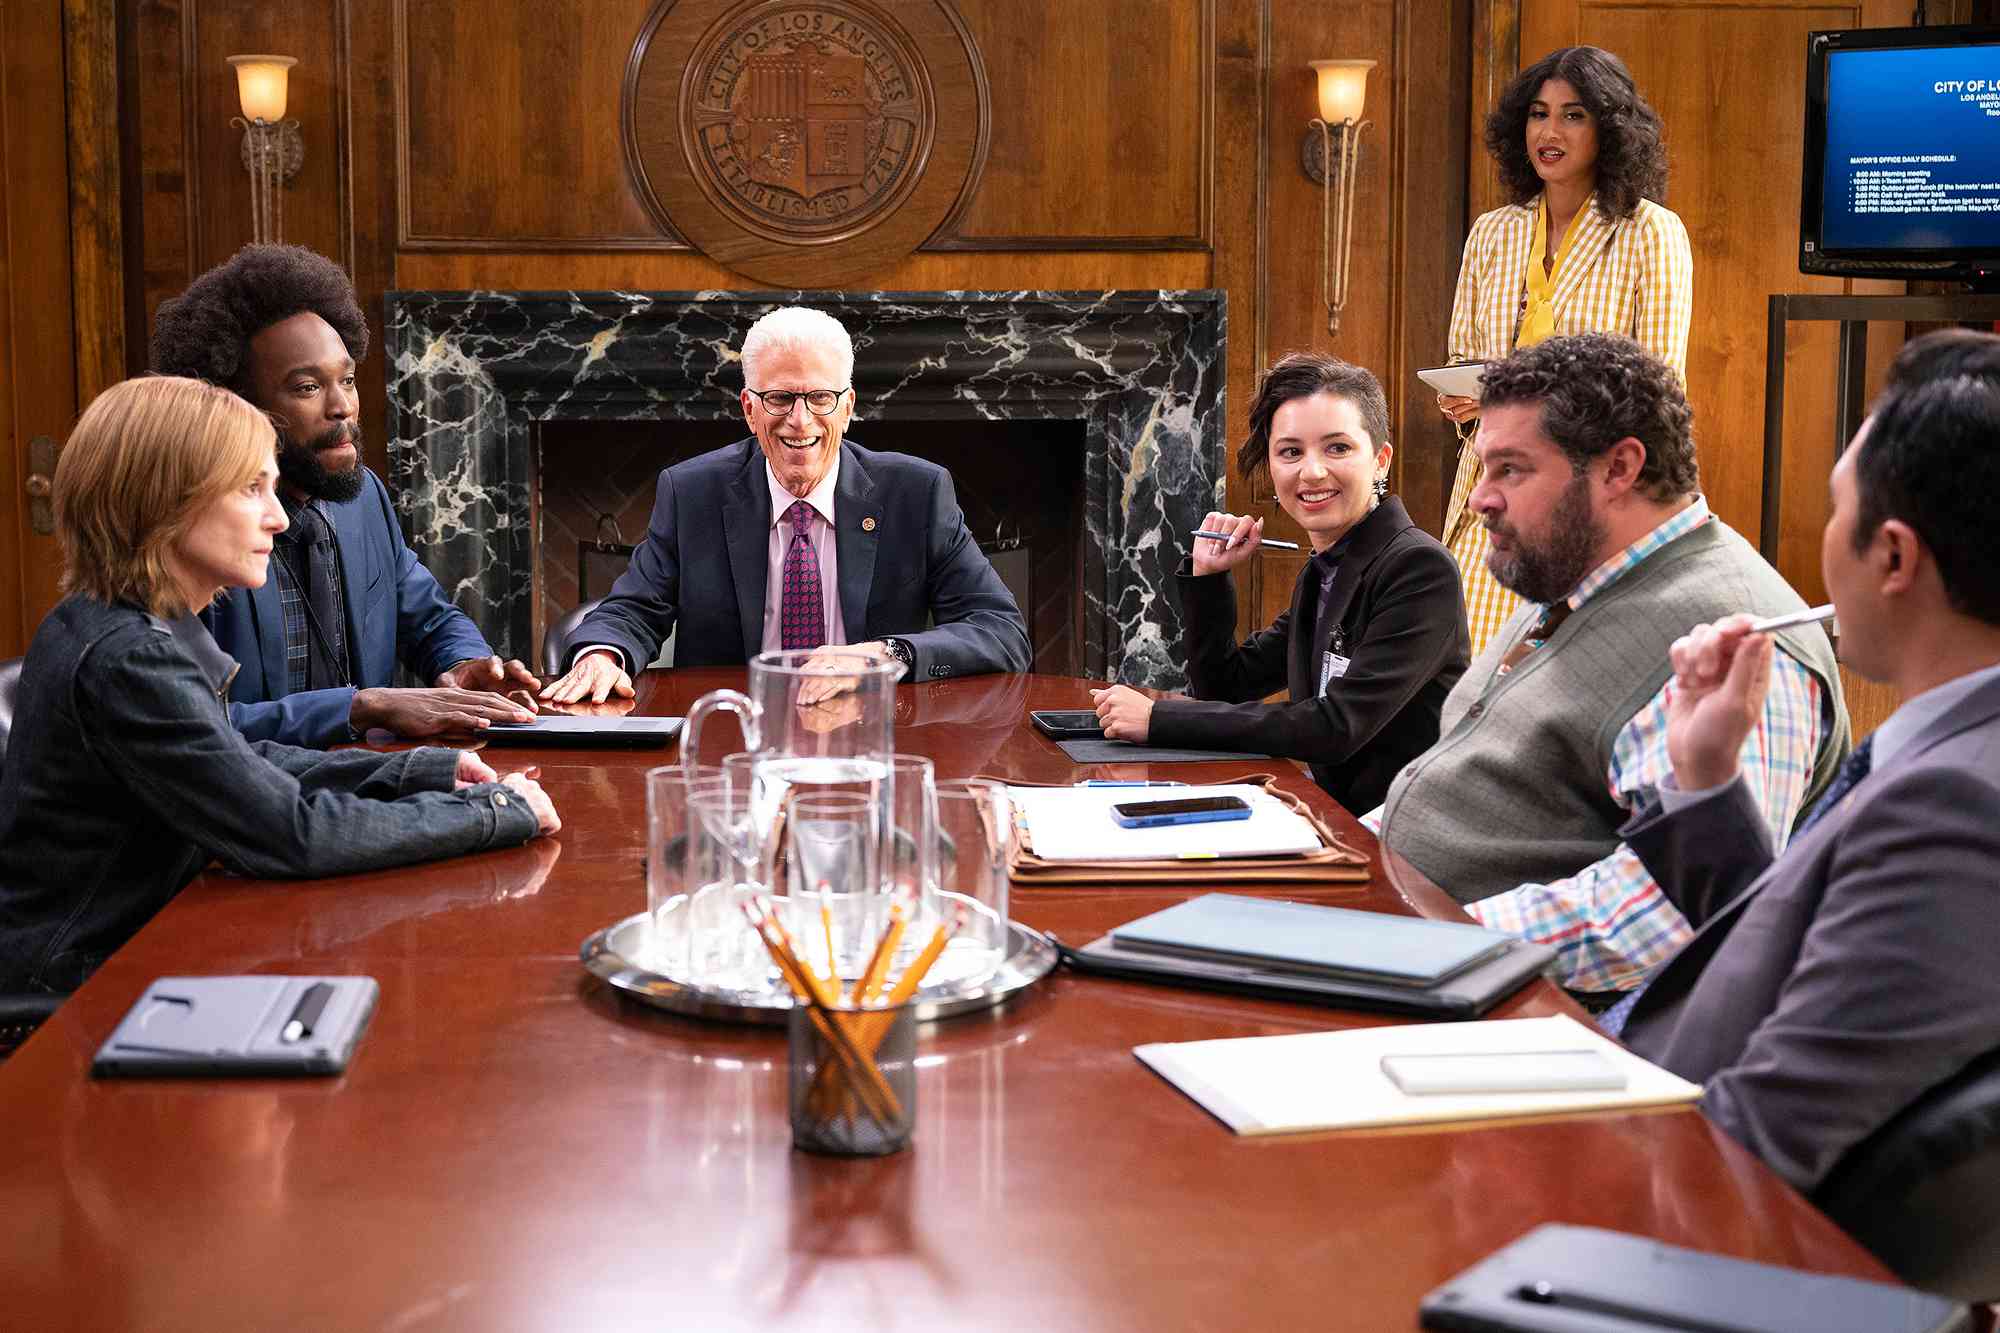 MR. MAYOR -- "Mayor Daddy" Episode 202 -- Pictured: (l-r) Holly Hunter as Arpi, Yedoye Travis as James, Ted Danson as Mayor Neil Bremer, Vella Lovell as Mikaela, Bobby Moynihan as Jayden, Mike Cabellon as Tommy